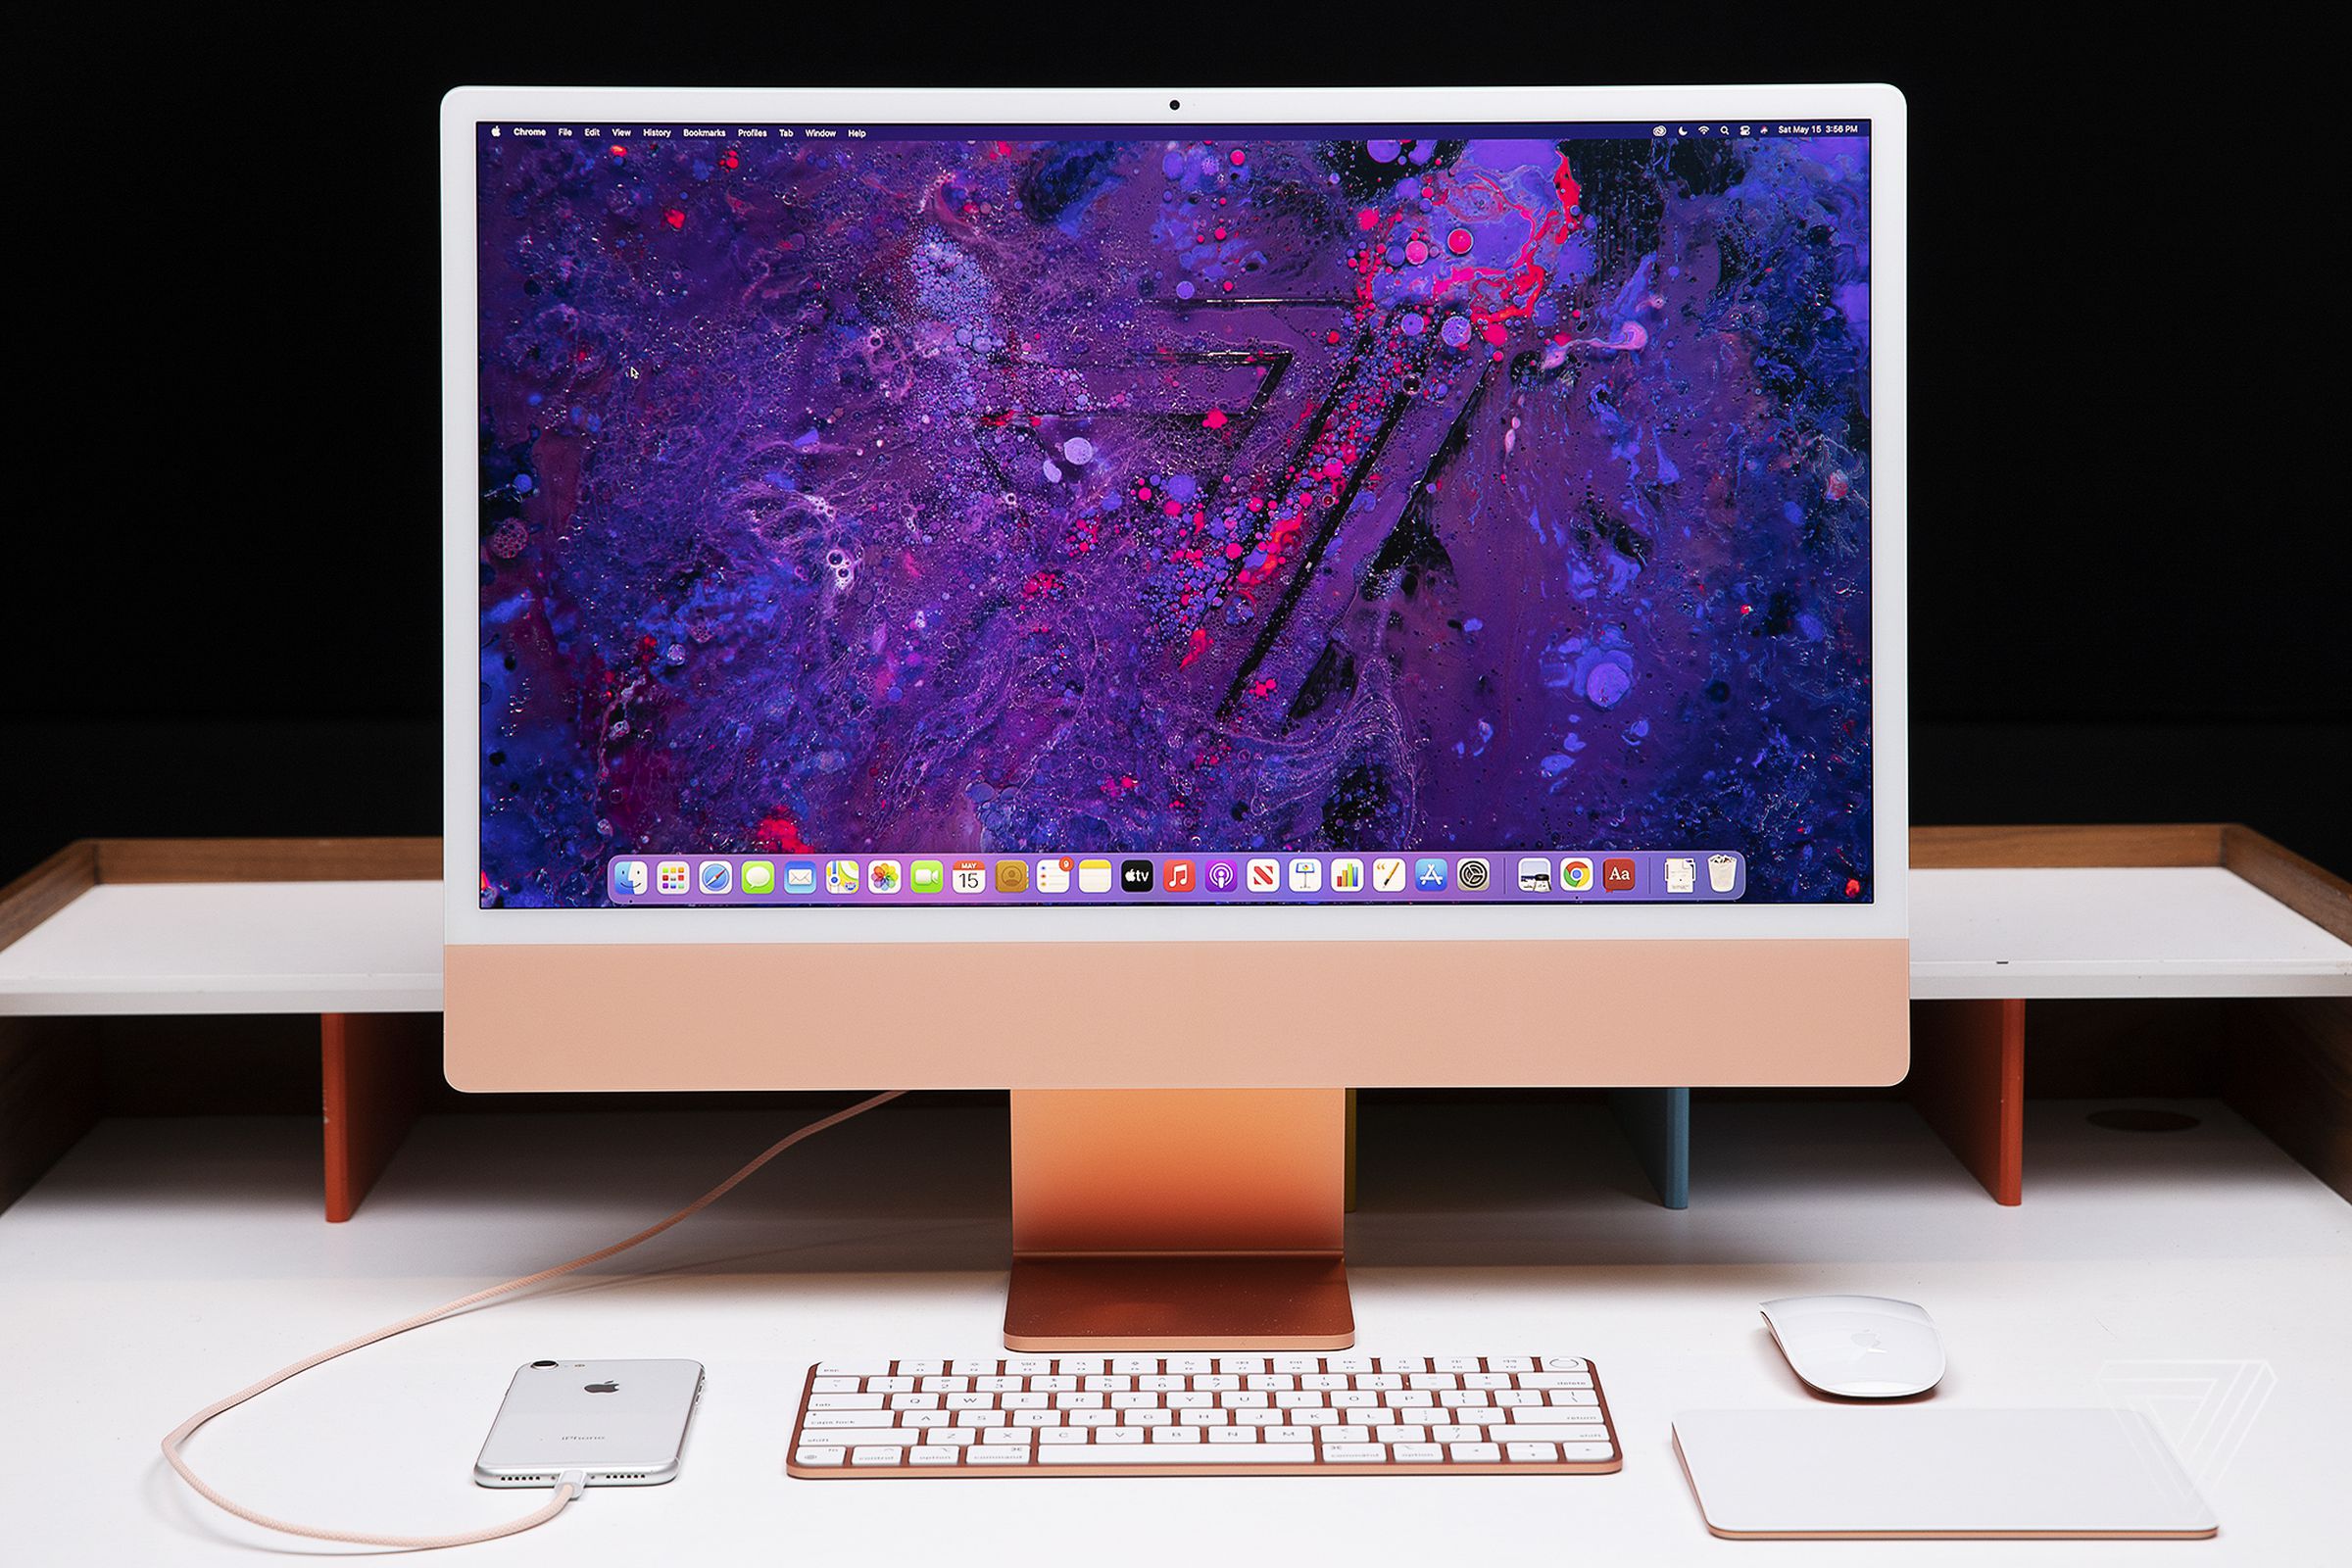 Apple’s new M1-equipped iMac.